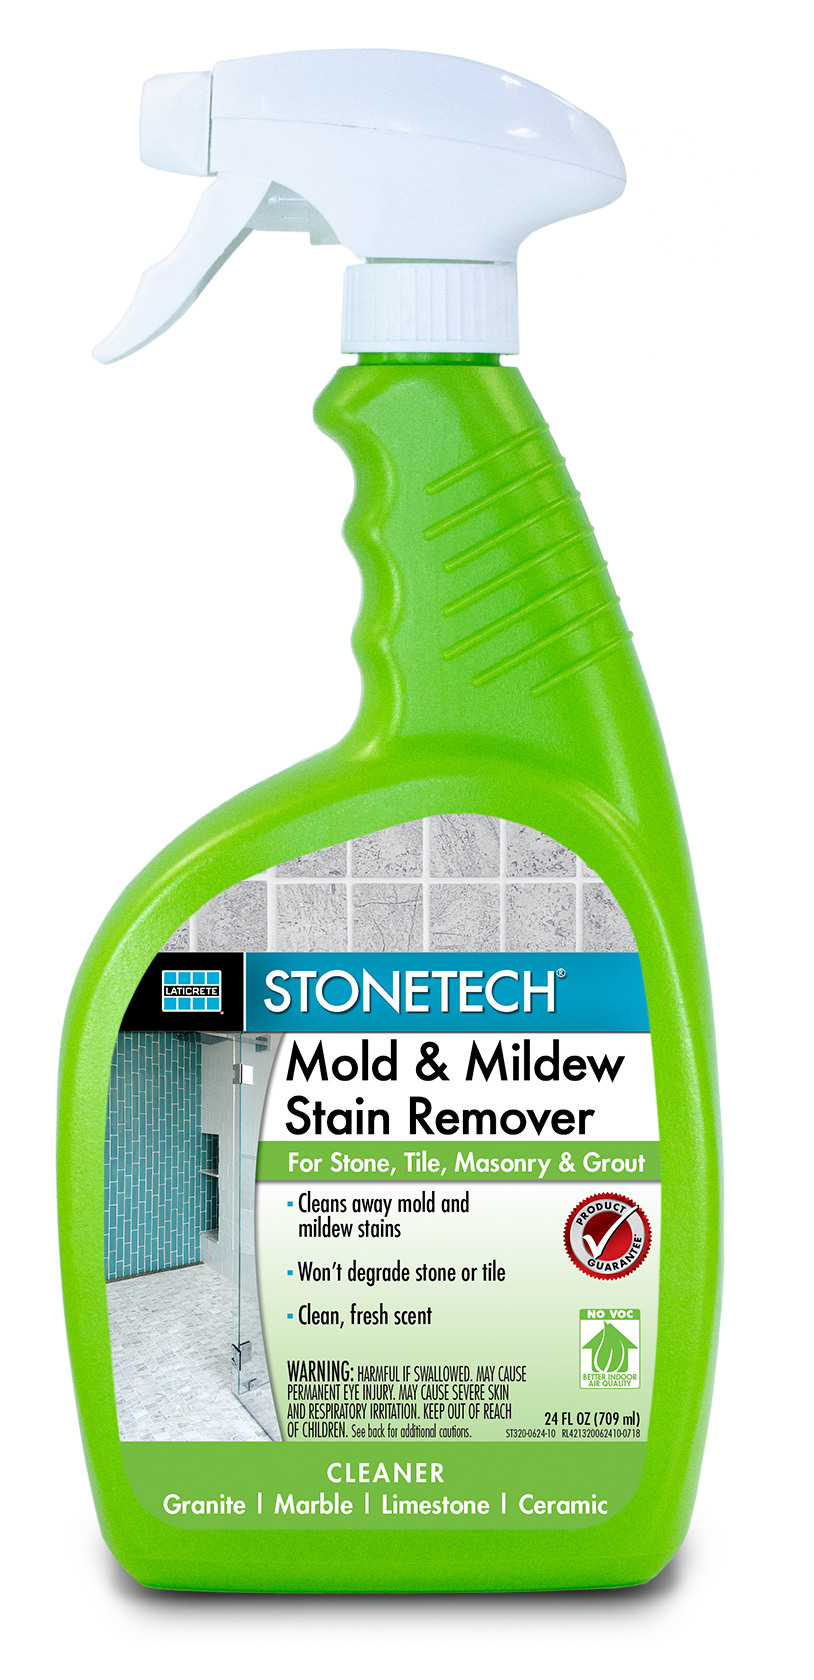 STONETECH Mold Remove & Mildew Stain Remover